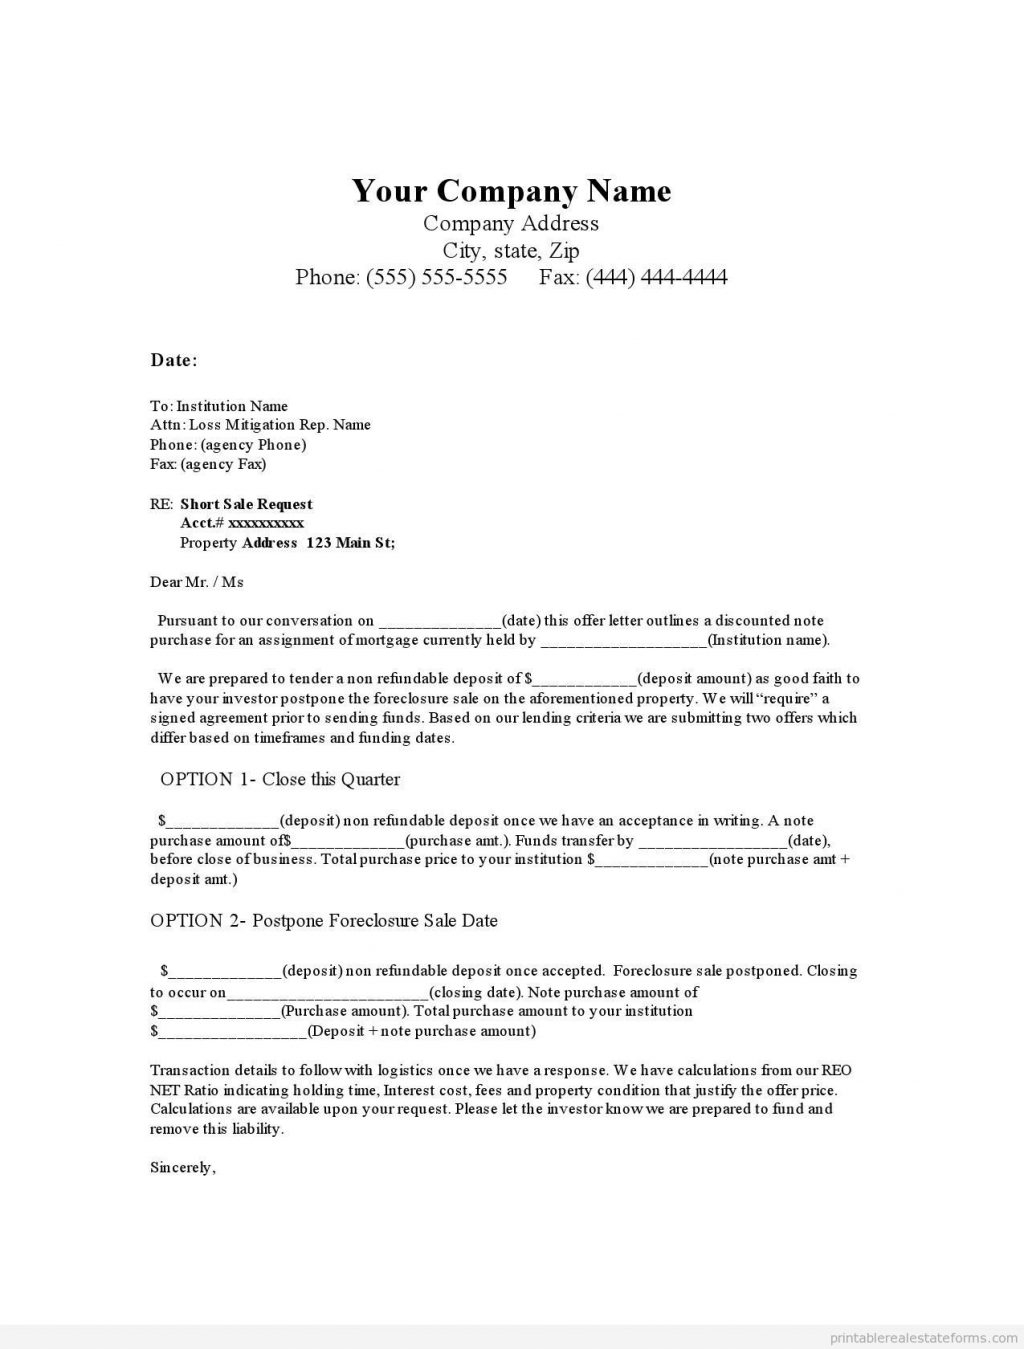 Land Purchase Offer Letter Template - Letter Fer to Purchase Business Reference Letter